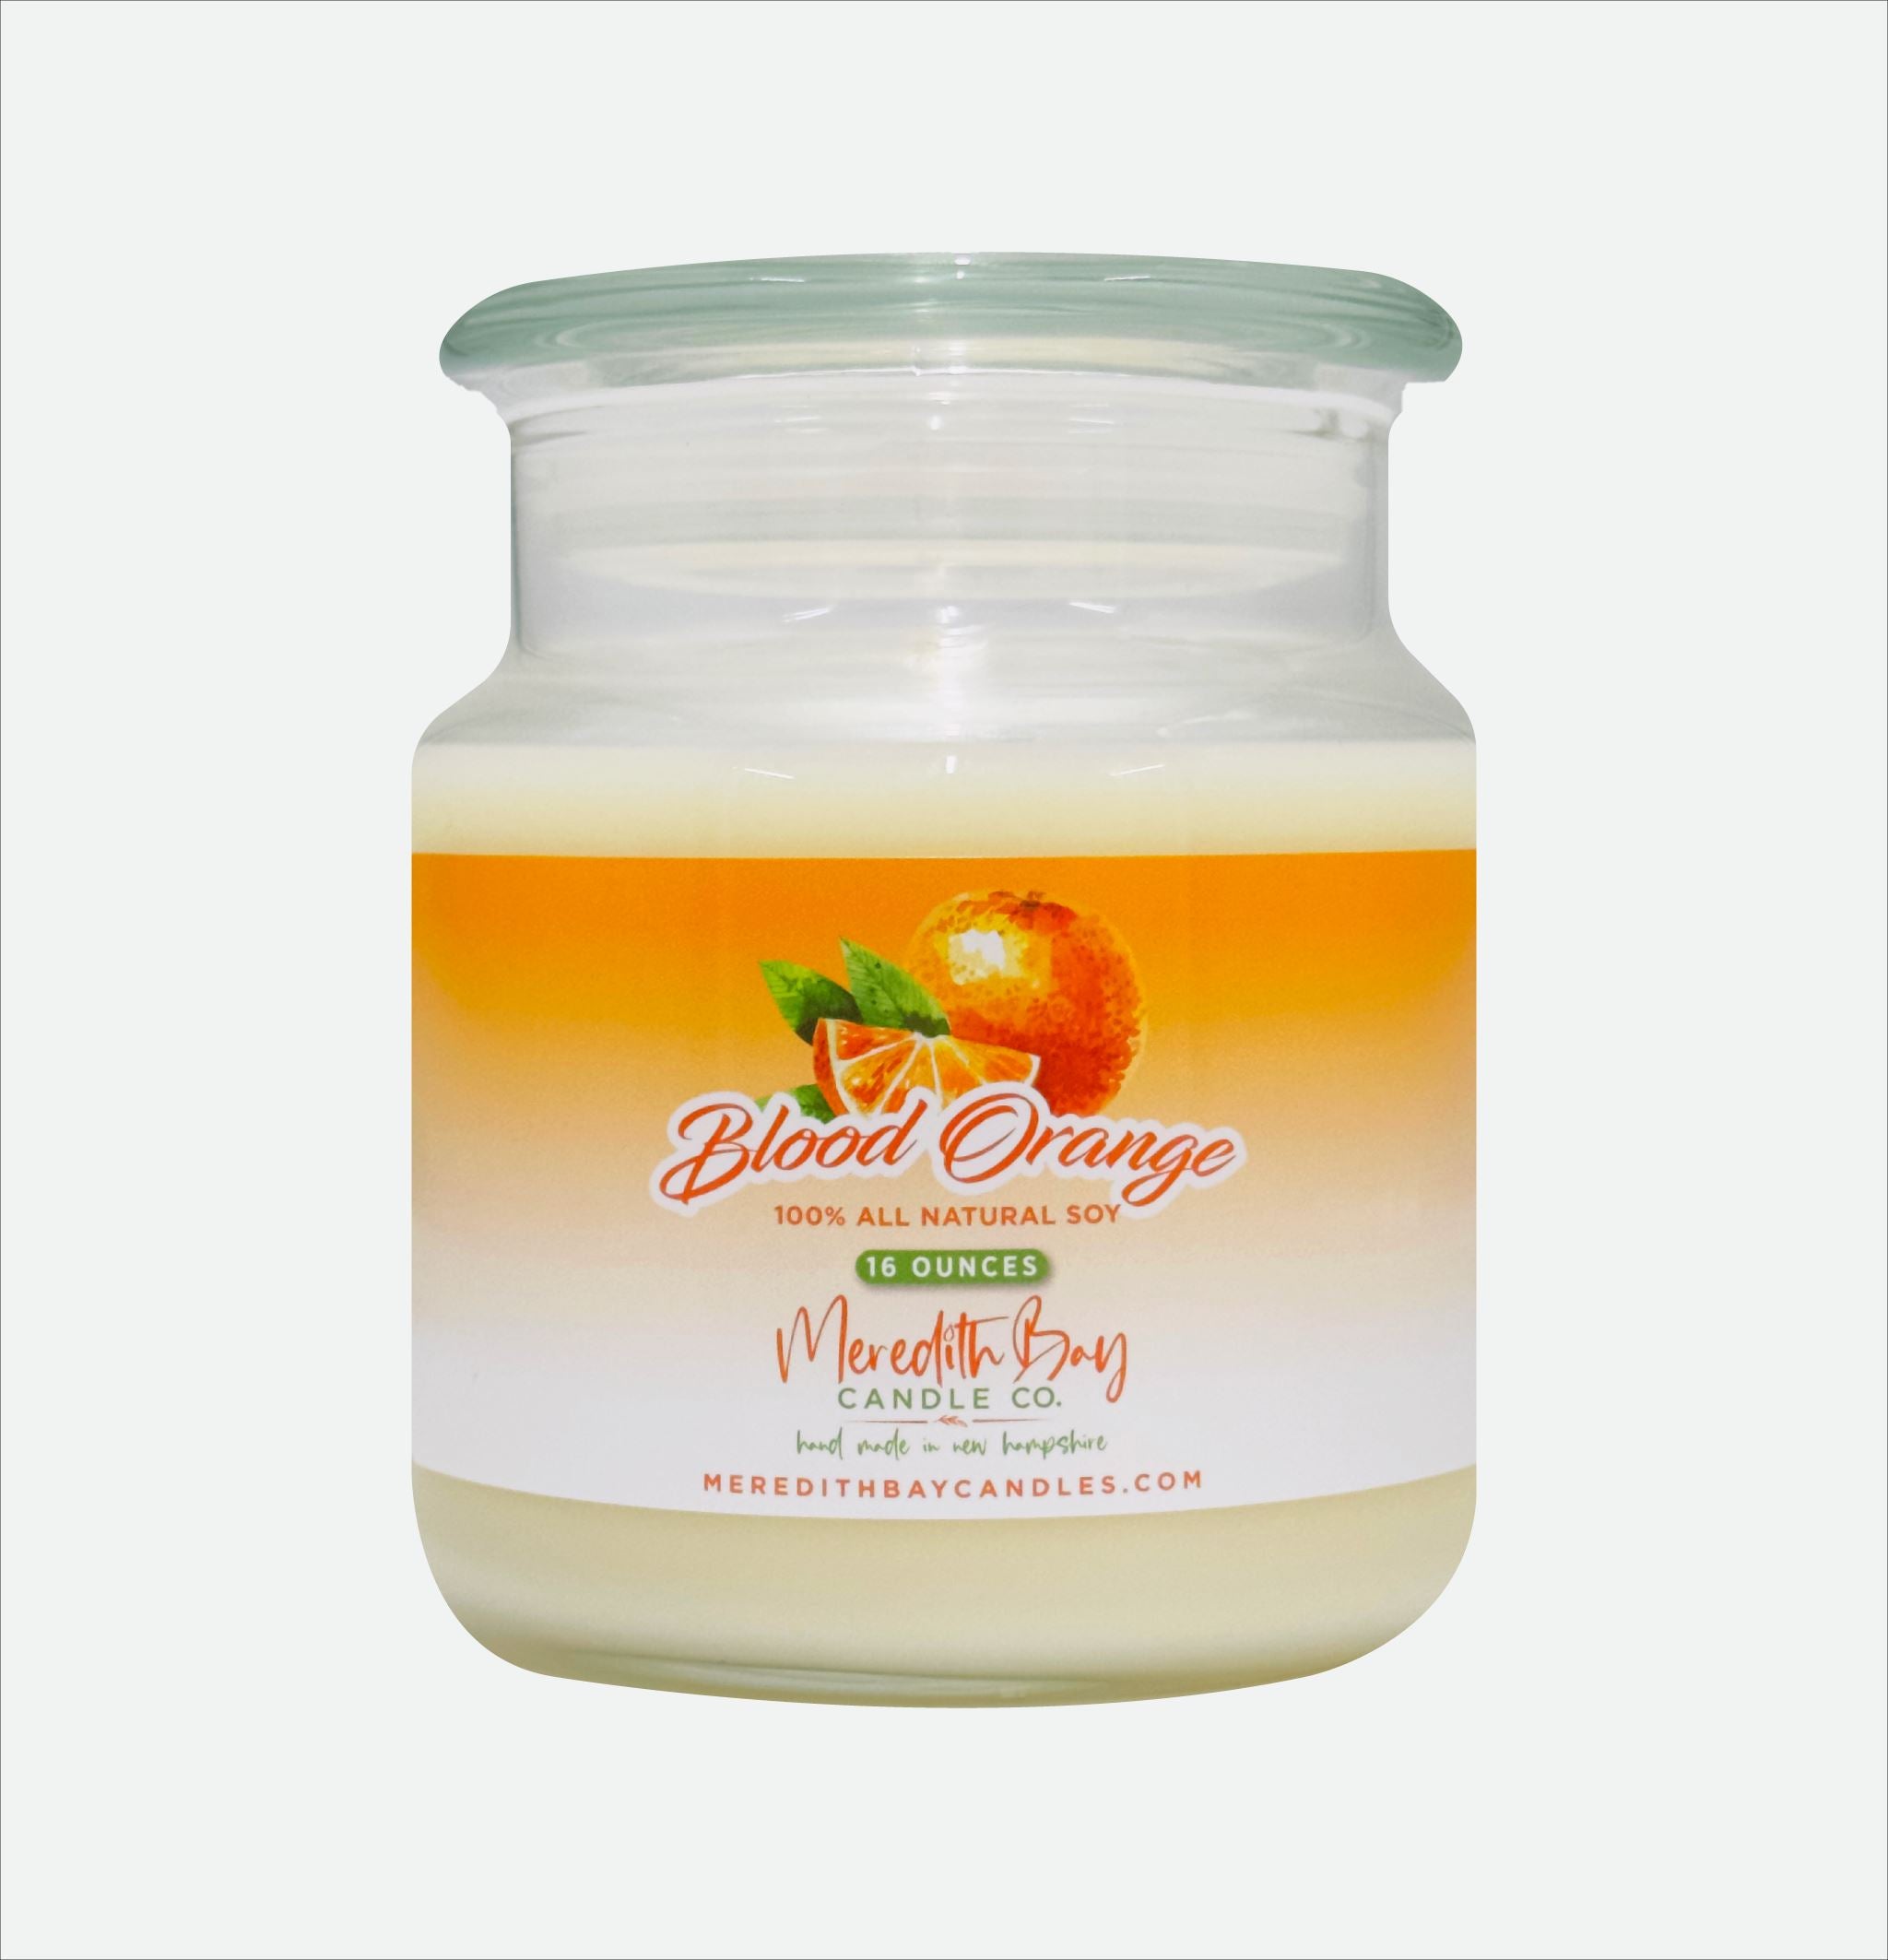 Blood Orange Soy Candle Soy Candle Meredith Bay Candle Co 16.0 Oz 